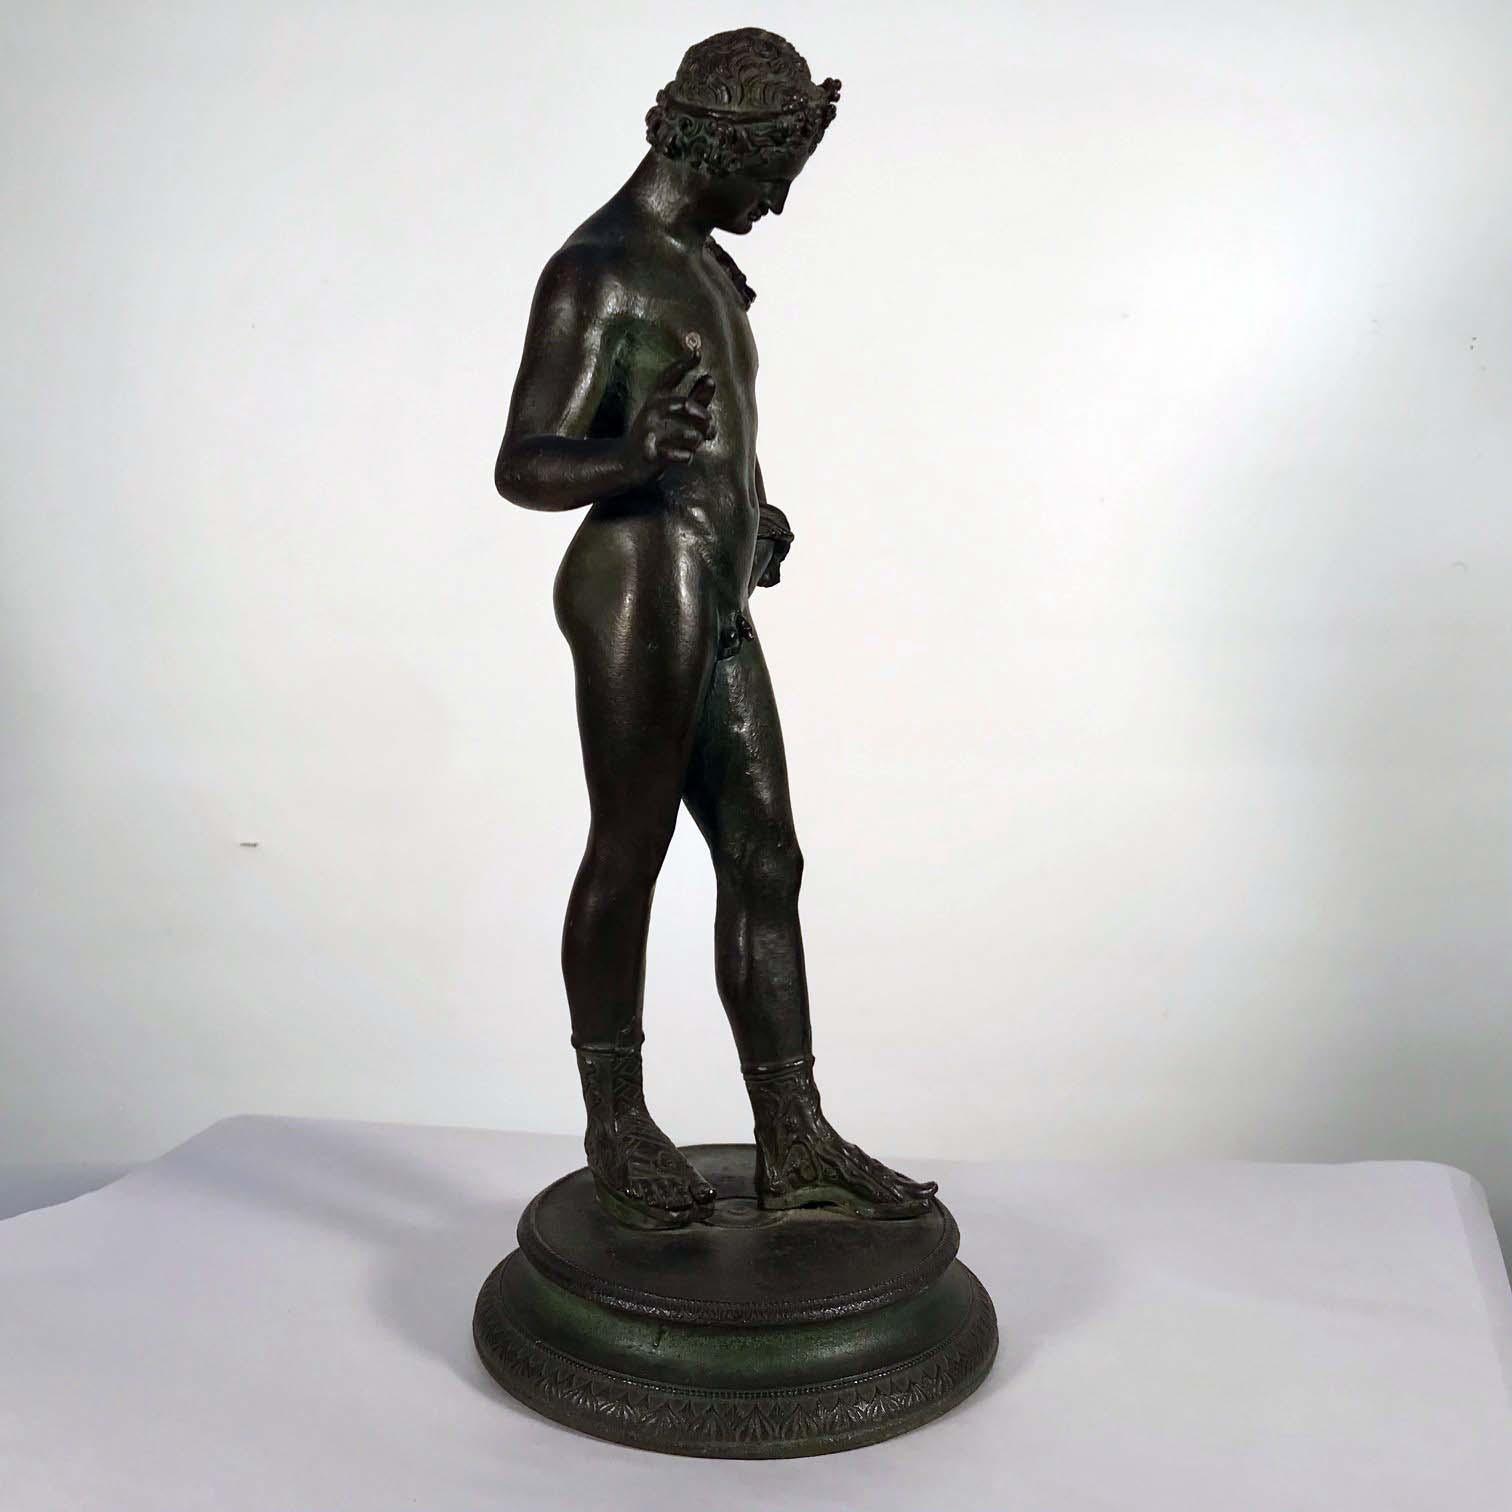 A late 19th century / early 20th century bronze figure of Narcissus, after the Antique, He wears a wreath in his hair and carries a goat skin wine sack and stands on a circular base.
Narcissus was a hunter and known for his beauty. He is said to